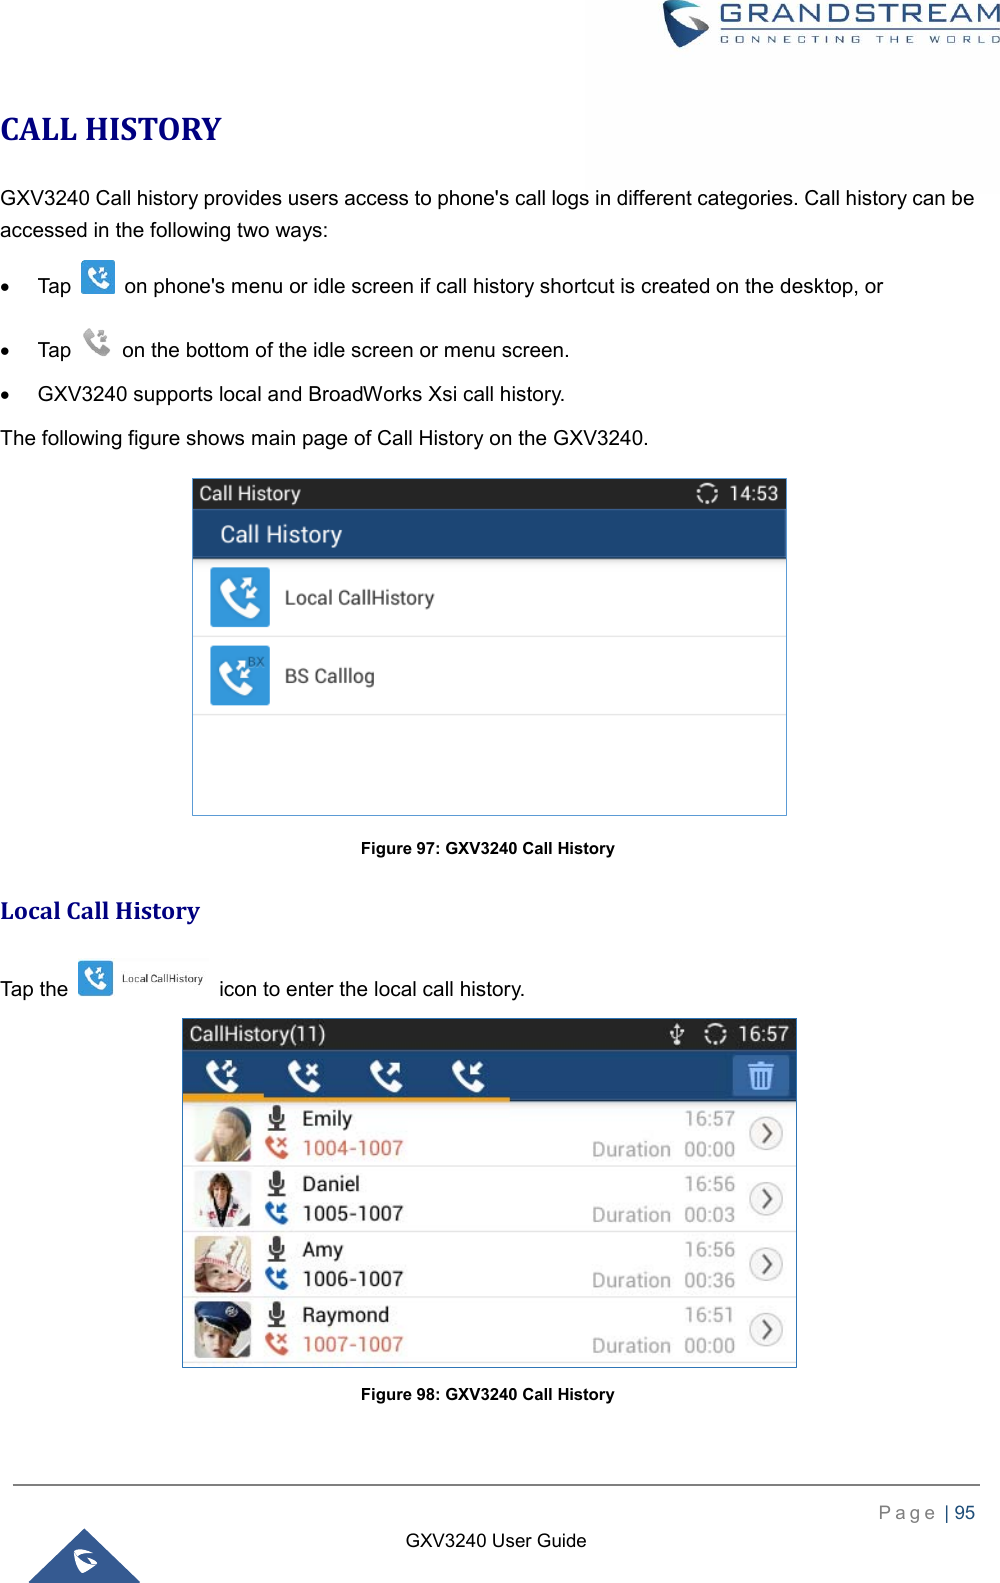    P a g e  | 95    GXV3240 User Guide  CALL HISTORY GXV3240 Call history provides users access to phone&apos;s call logs in different categories. Call history can be accessed in the following two ways:   Tap    on phone&apos;s menu or idle screen if call history shortcut is created on the desktop, or   Tap    on the bottom of the idle screen or menu screen.   GXV3240 supports local and BroadWorks Xsi call history.   The following figure shows main page of Call History on the GXV3240.  Figure 97: GXV3240 Call History Local Call History Tap the    icon to enter the local call history.    Figure 98: GXV3240 Call History 